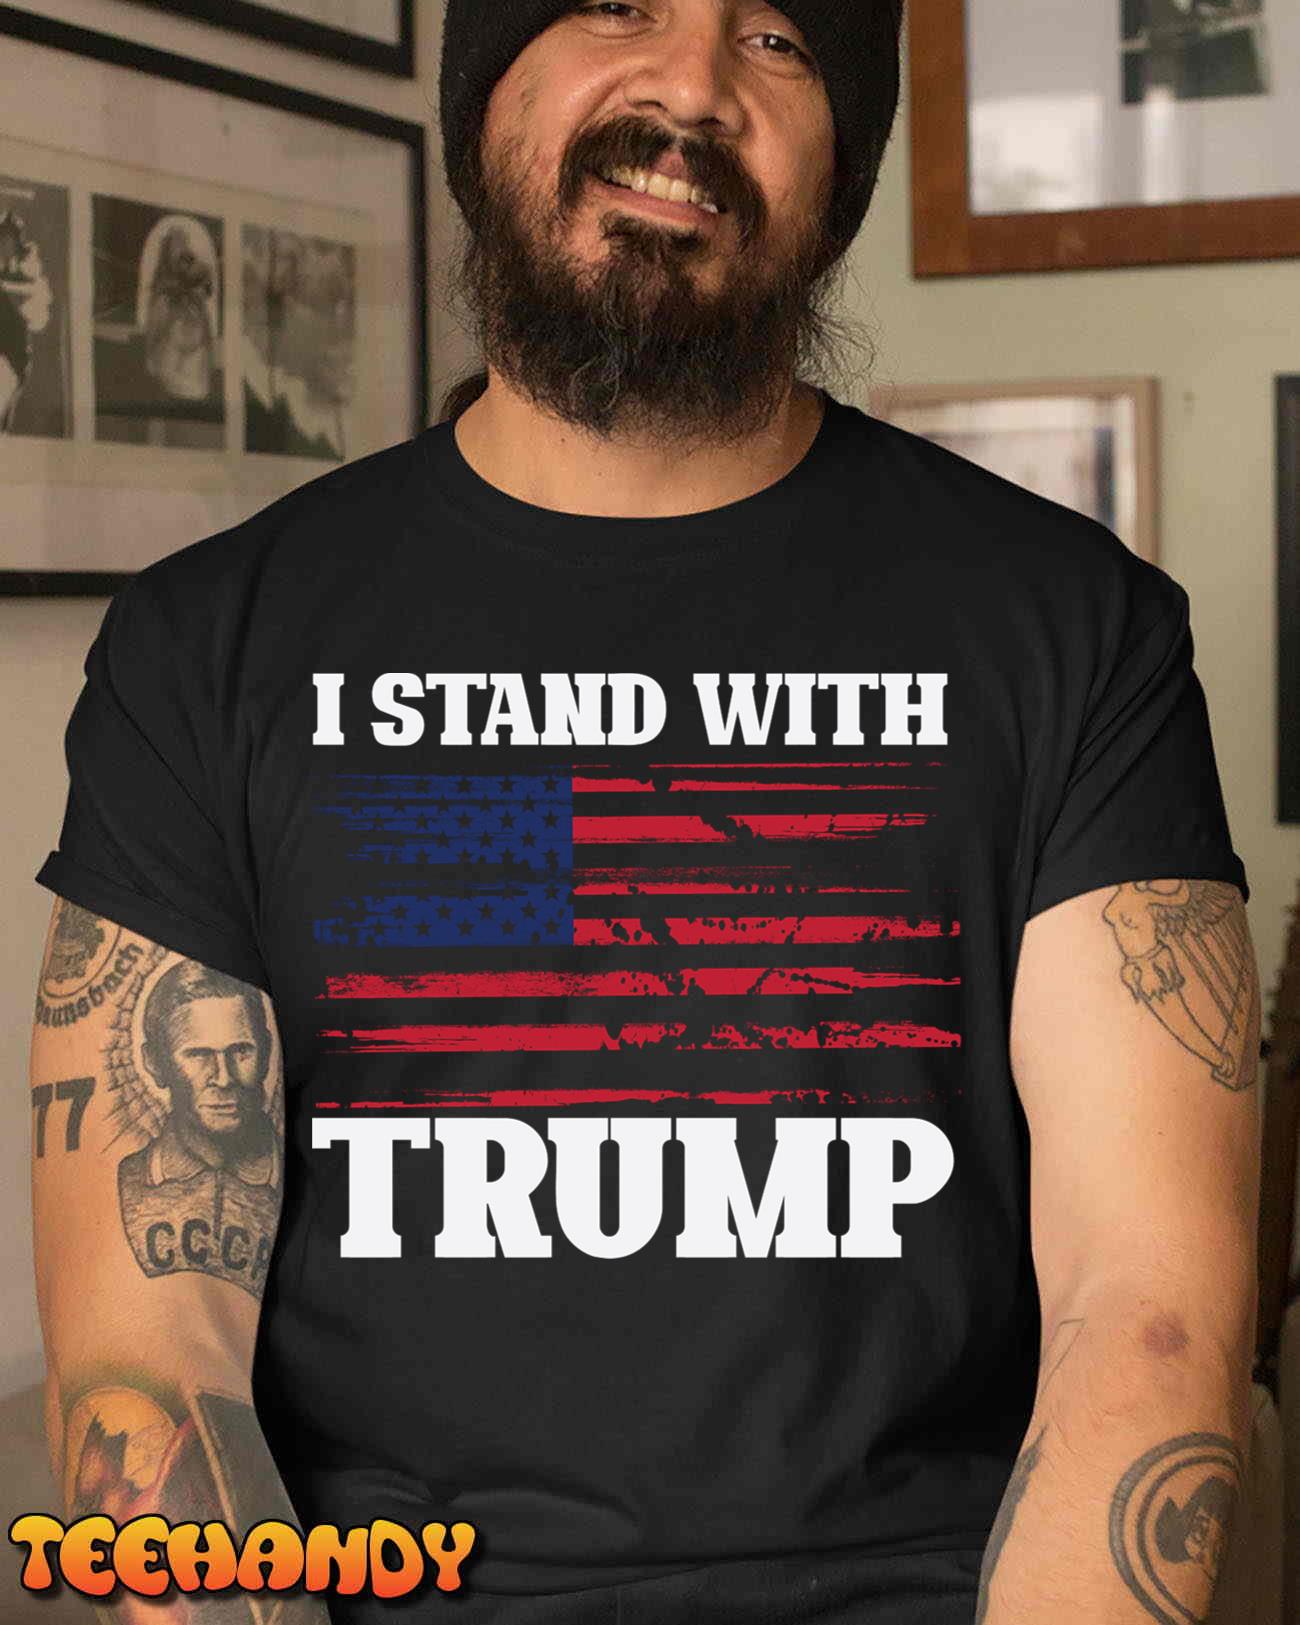 Pro Trump Supporter Trump Shirt I Stand With Trump T-Shirt